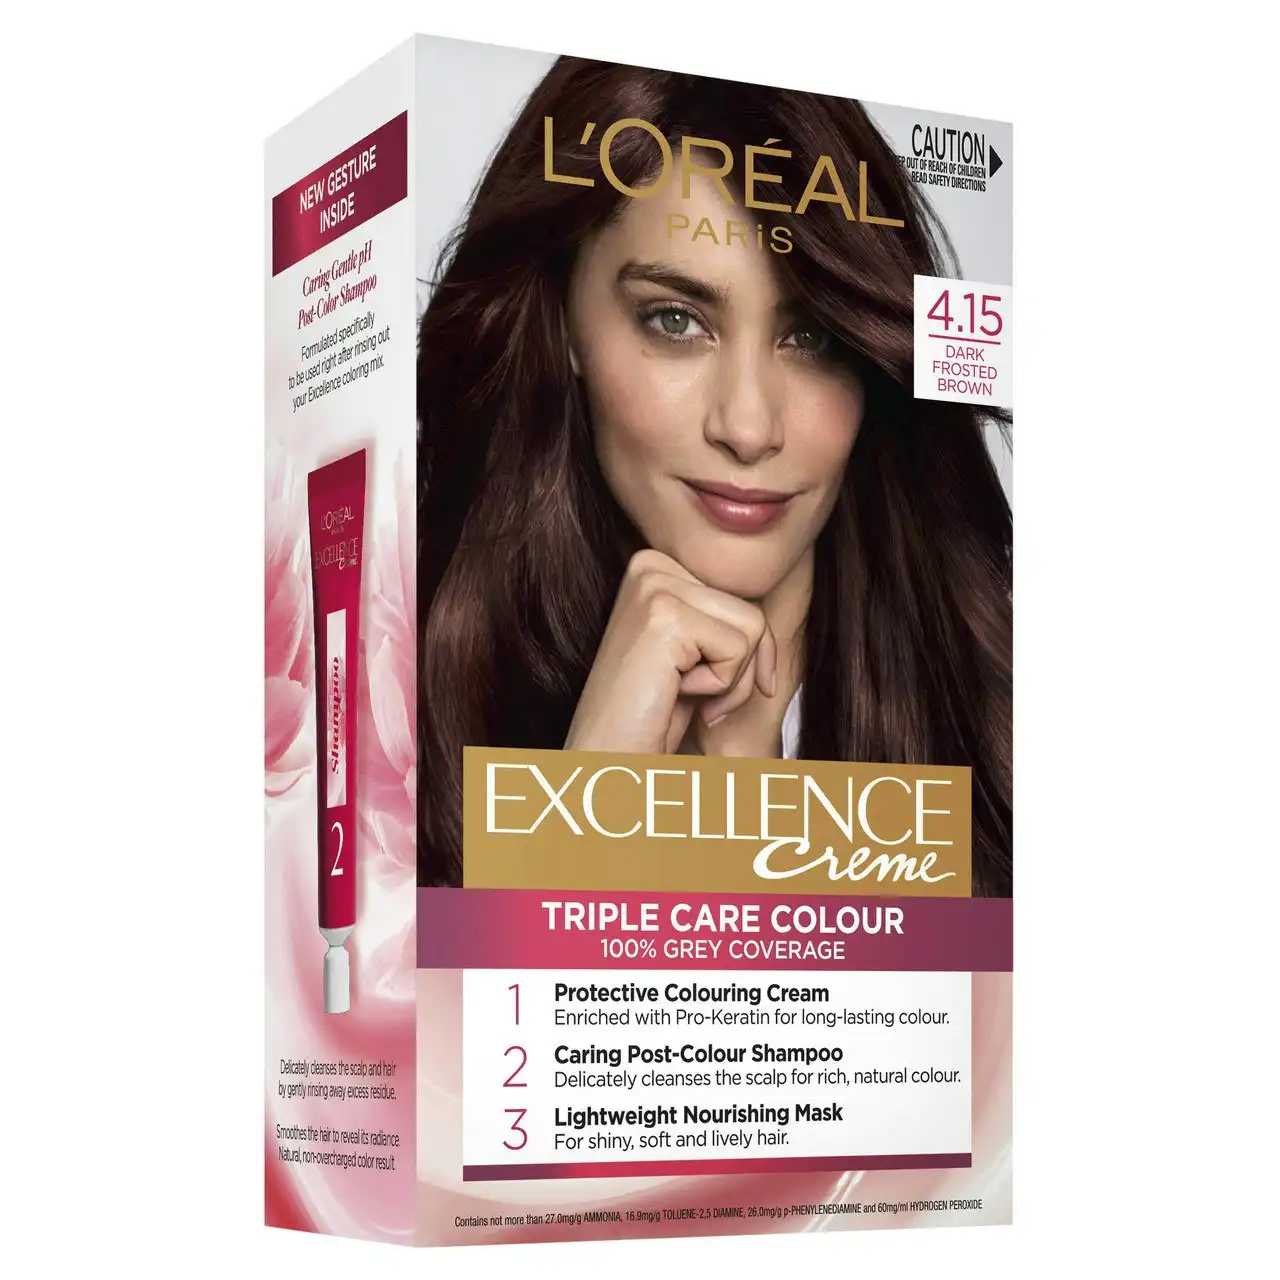 L'Oreal Paris Excellence Creme Permanent Hair Colour - 4.15 Dark Frosted Brown